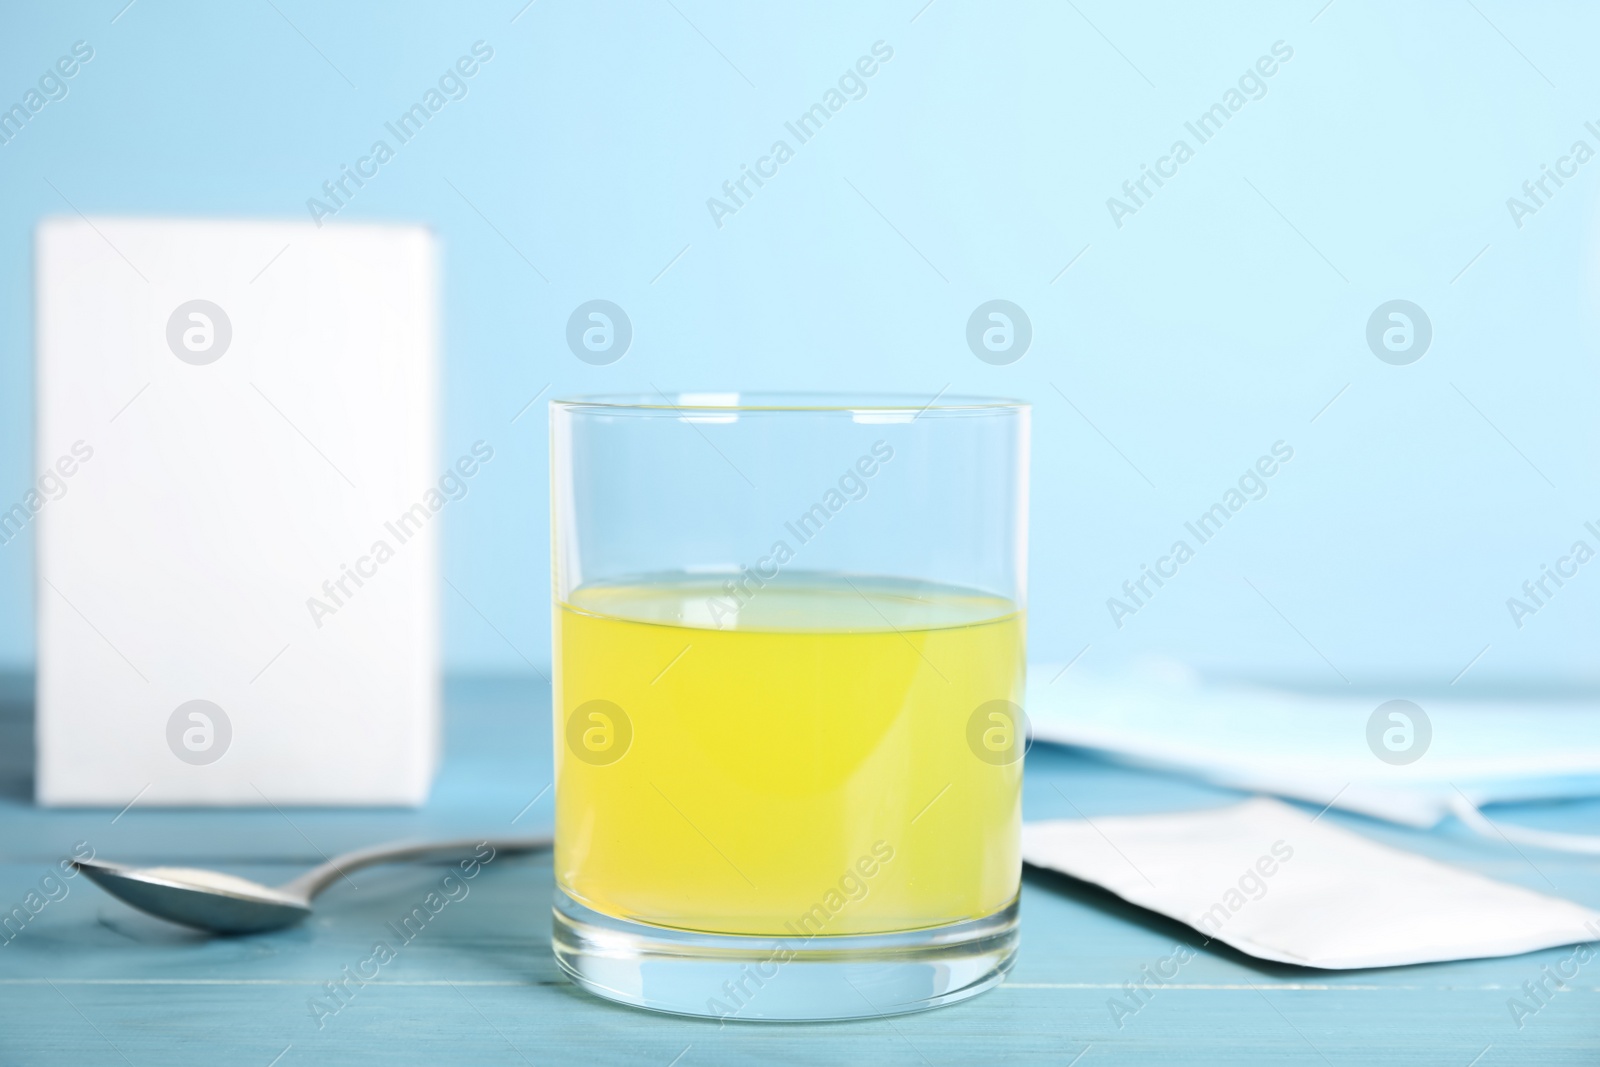 Photo of Glass of dissolved medicine, spoon with powder and sachet on blue wooden table